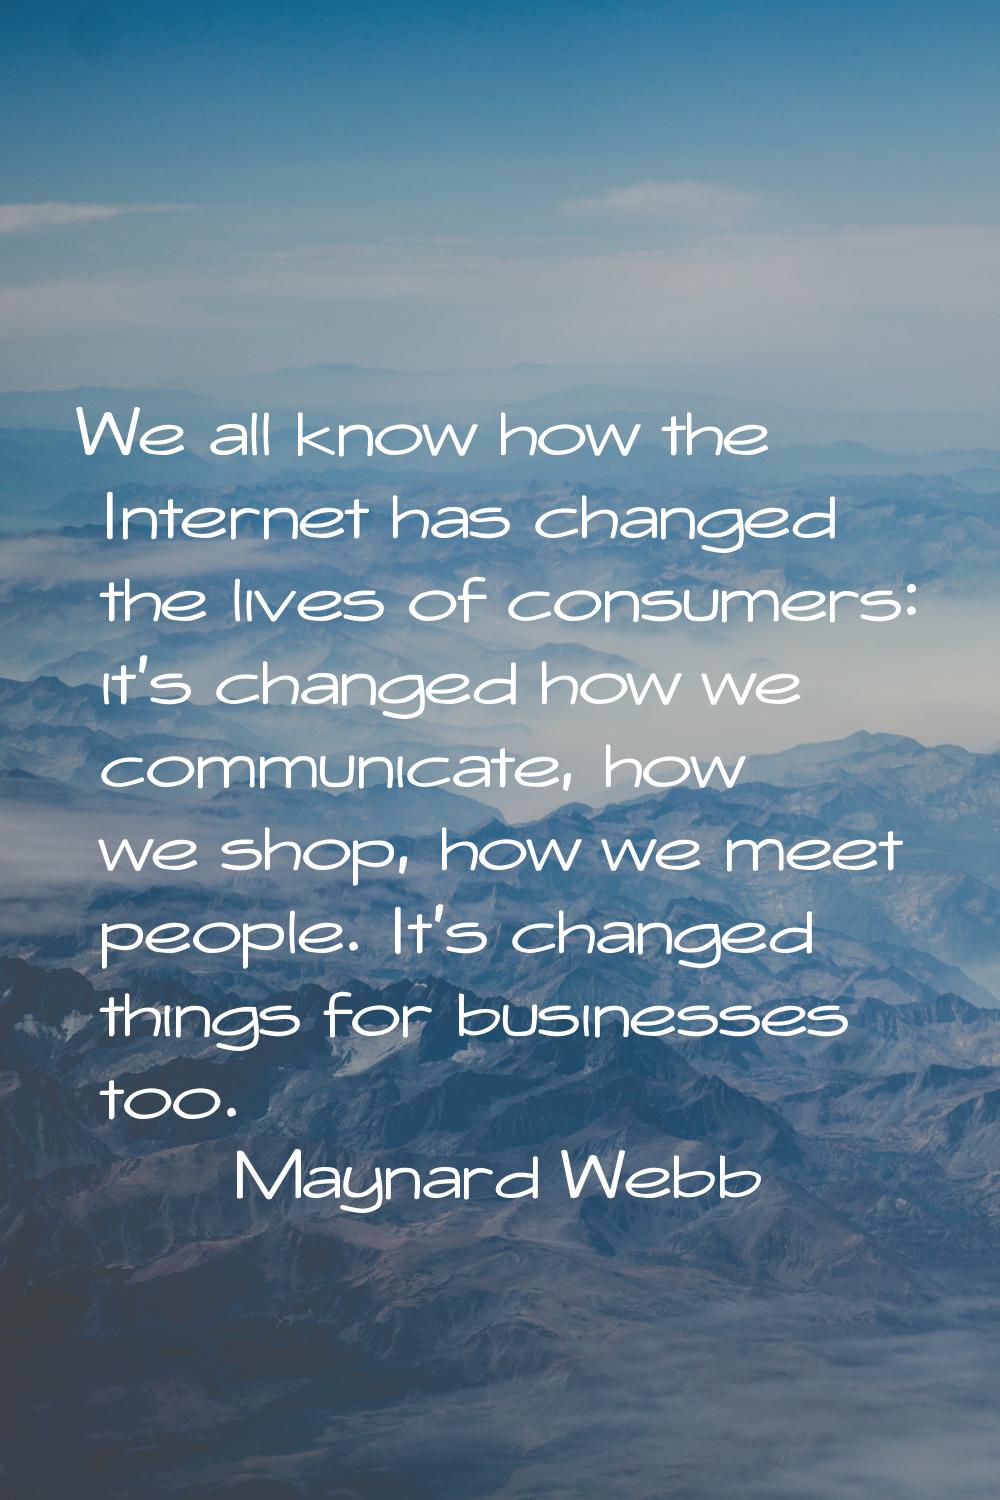 We all know how the Internet has changed the lives of consumers: it's changed how we communicate, h